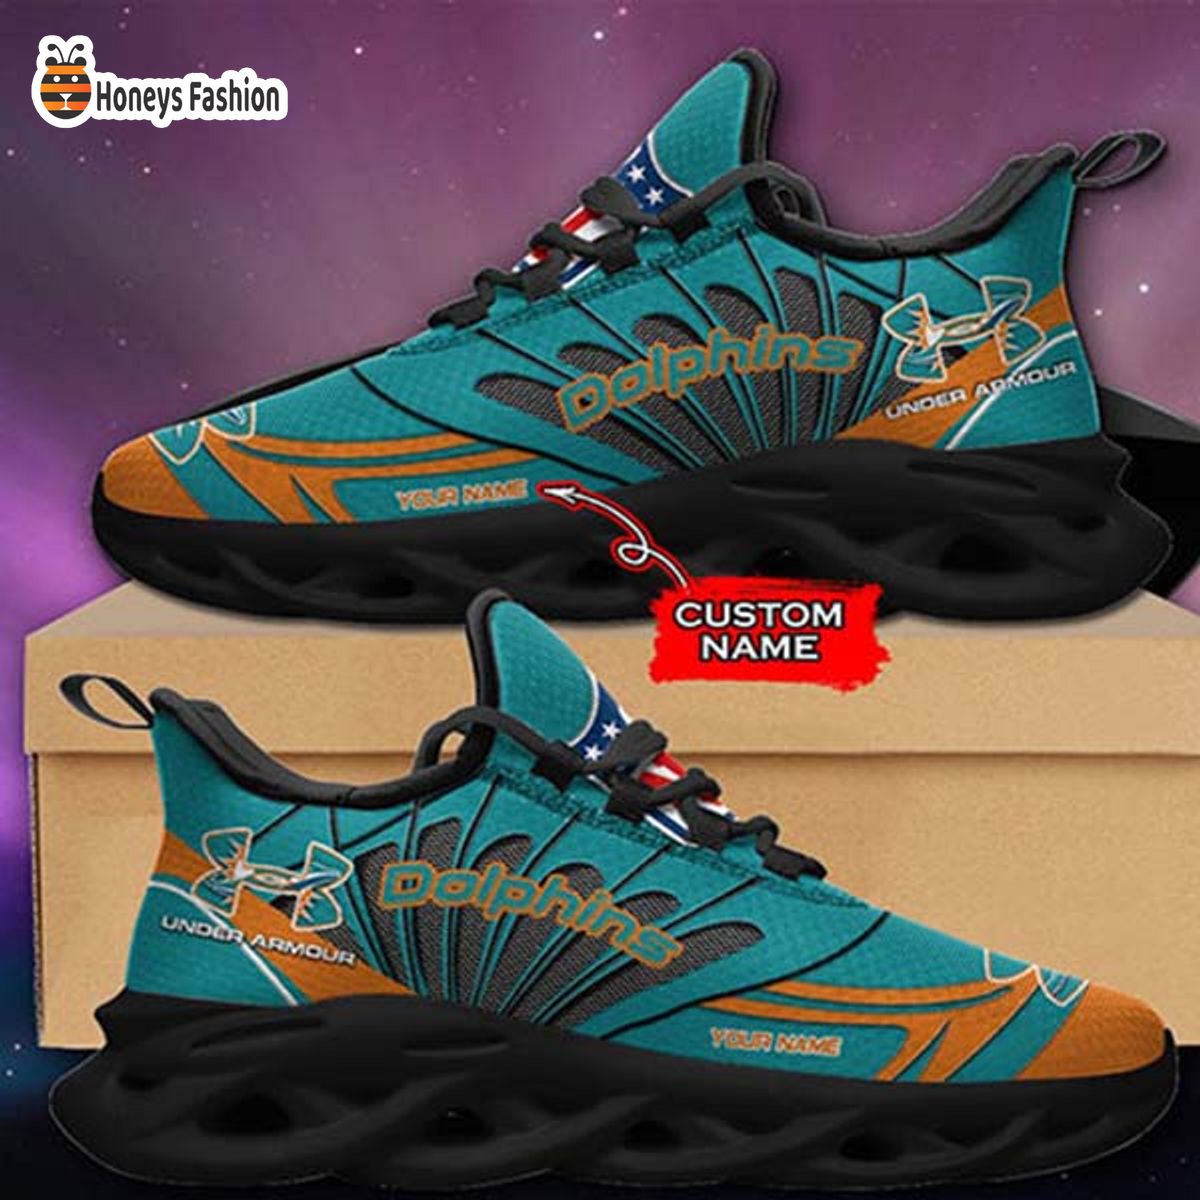 Miami Dolphins Under Armour Custom Name Max Soul Sneaker